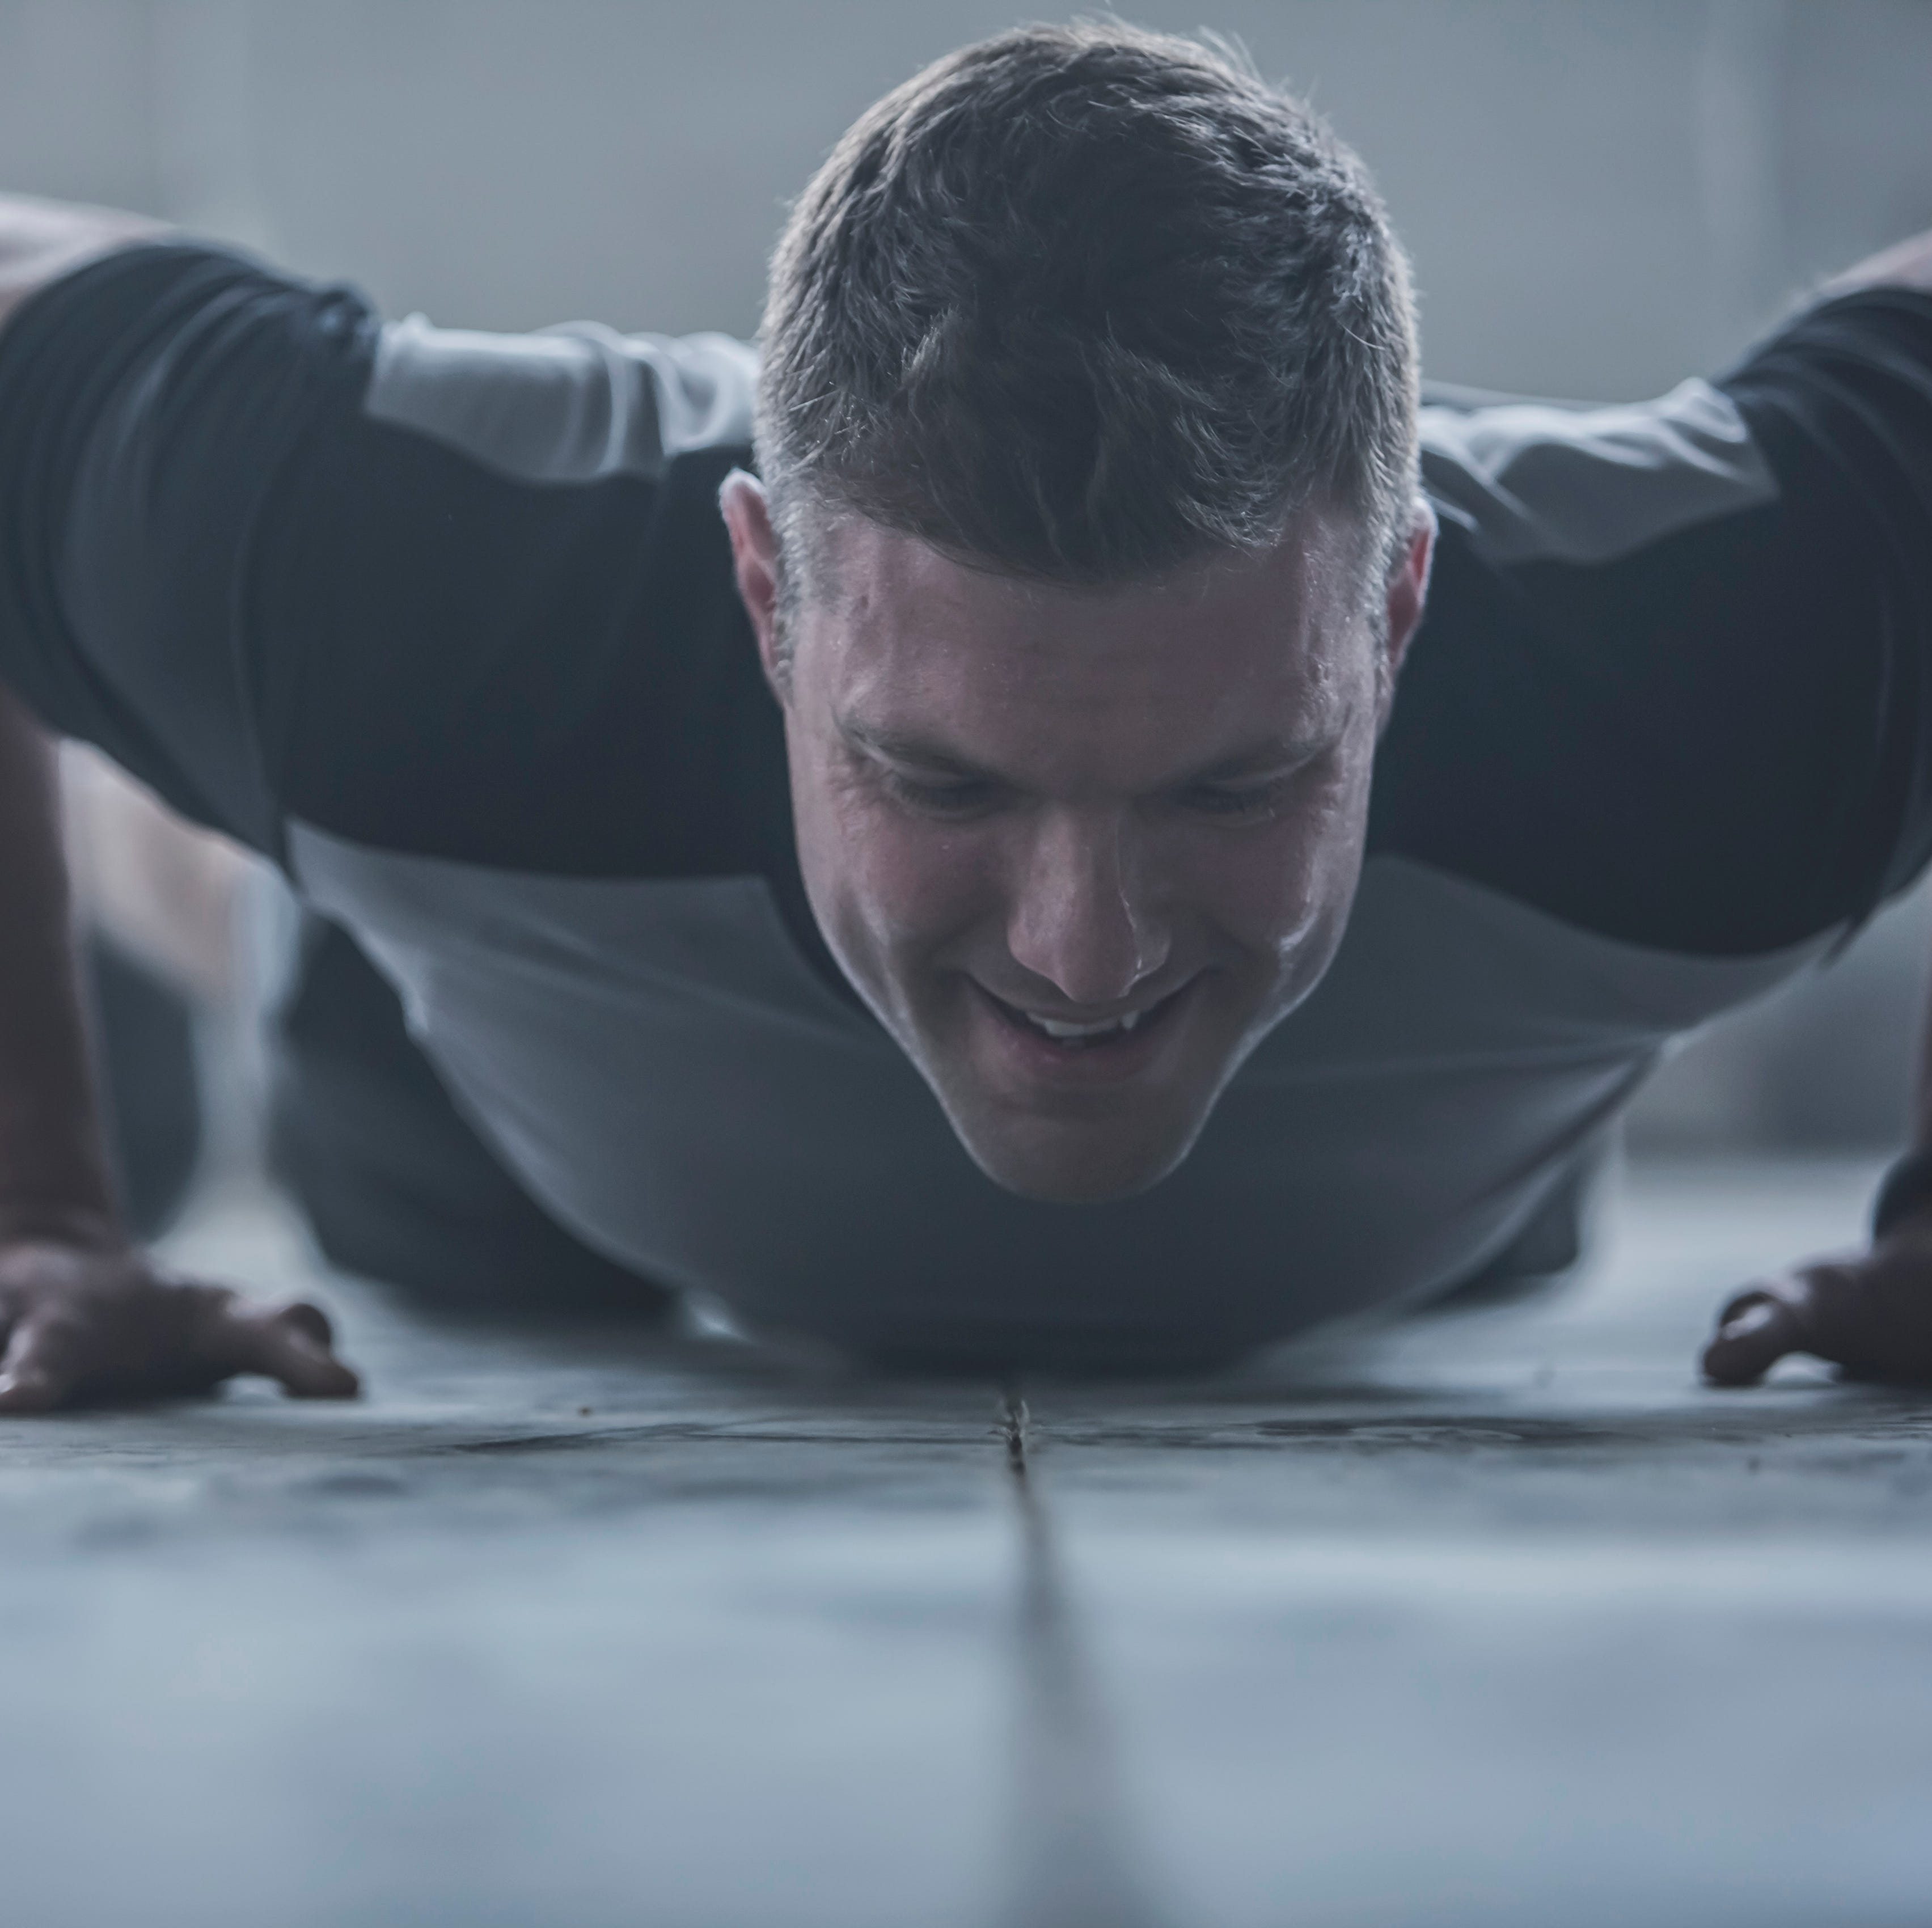 If You Want to Get Better at Pushups, Don't Get on Your Knees